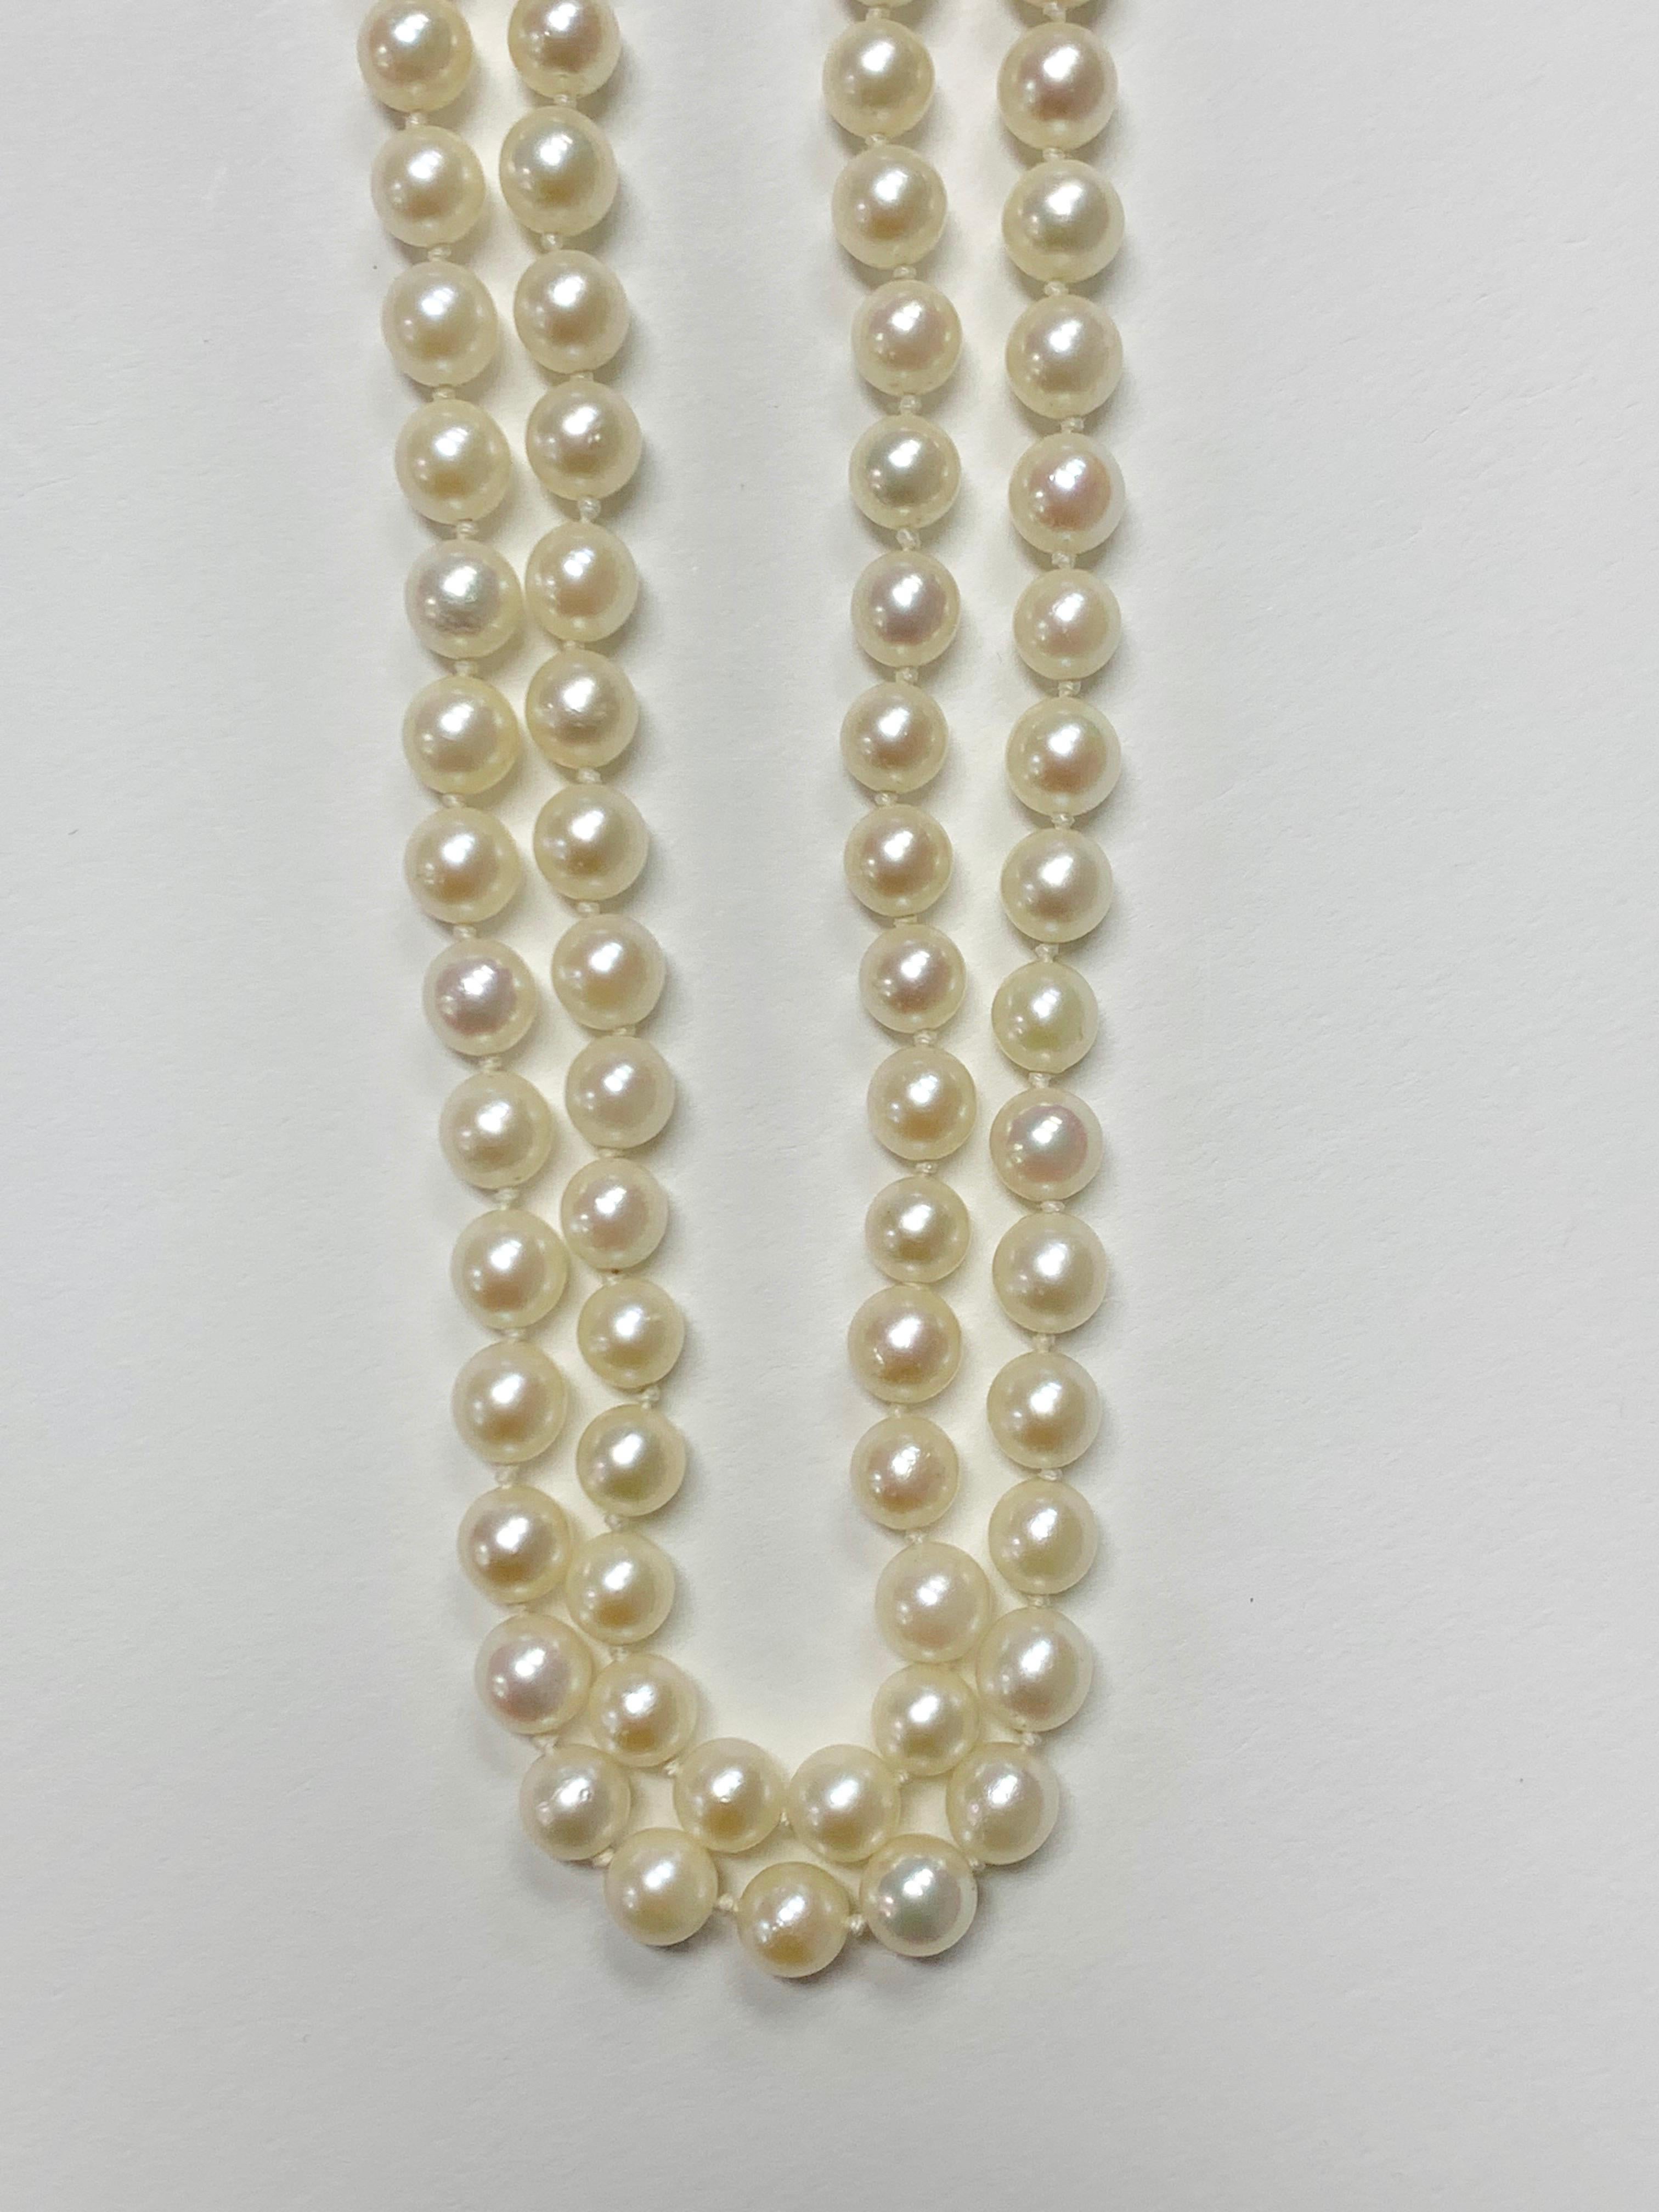 1920s necklace styles